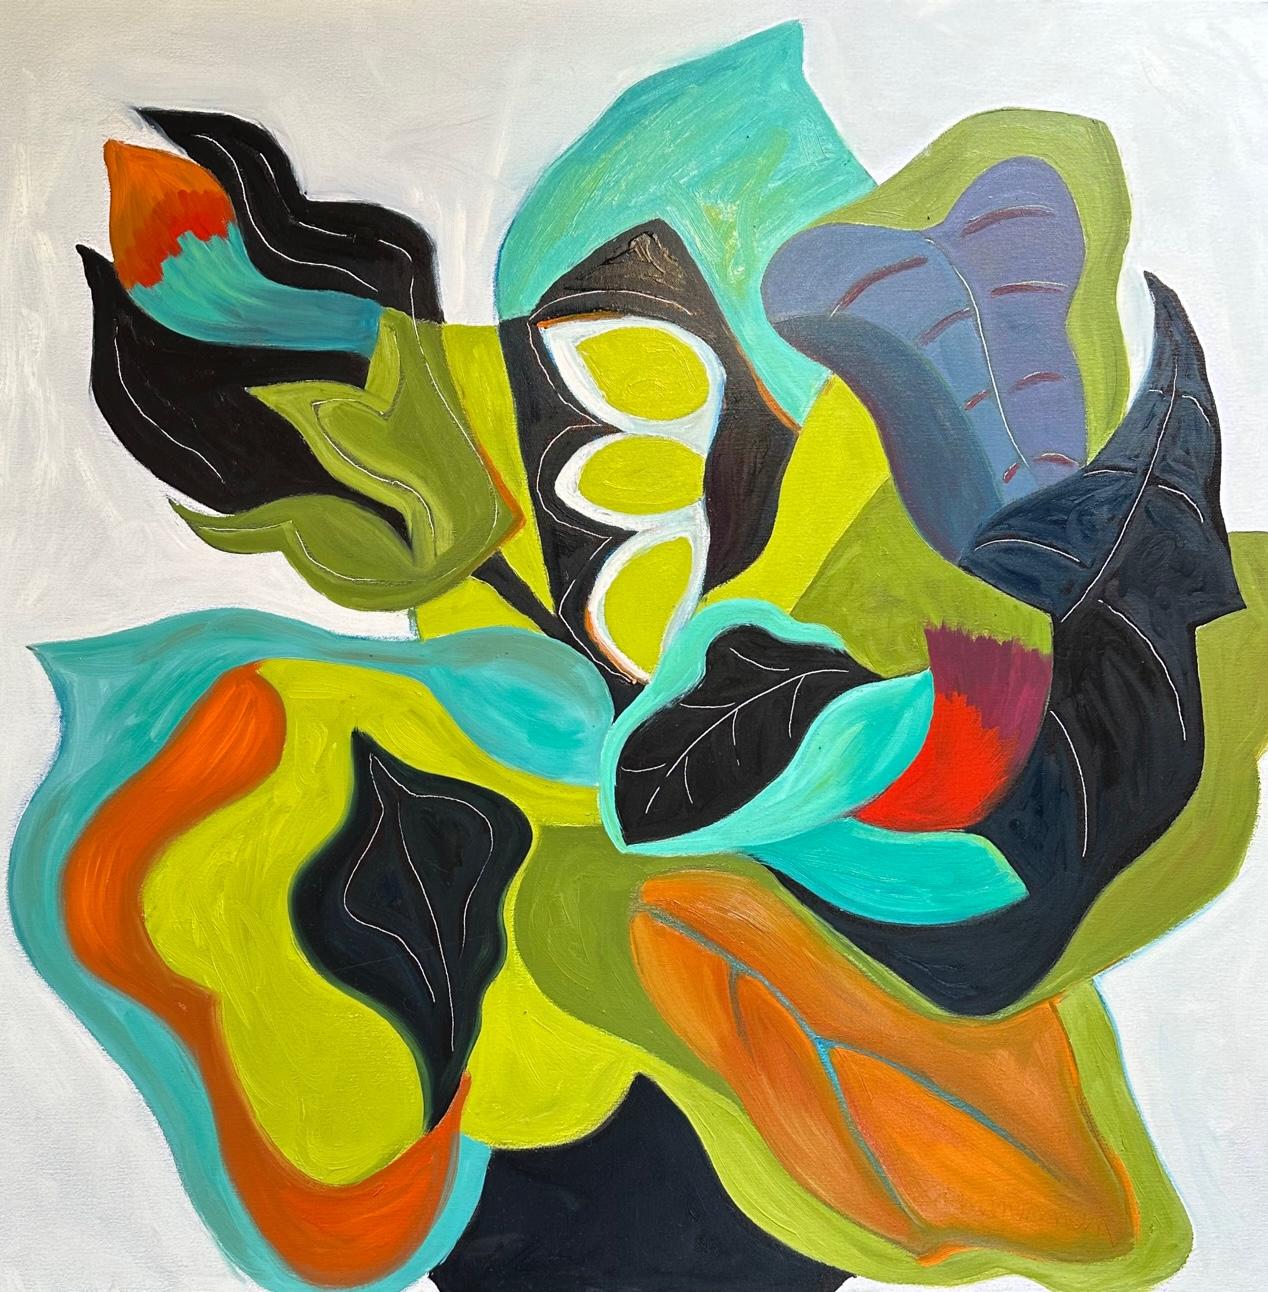 This masterpiece is exhibited in the Zimmerman Gallery, Carmel CA.


Marc Zimmerman creates playful paintings, whether deep mysterious jungle or delightfully whimsical florals. His color palette explores various harmonies yet always surprises with